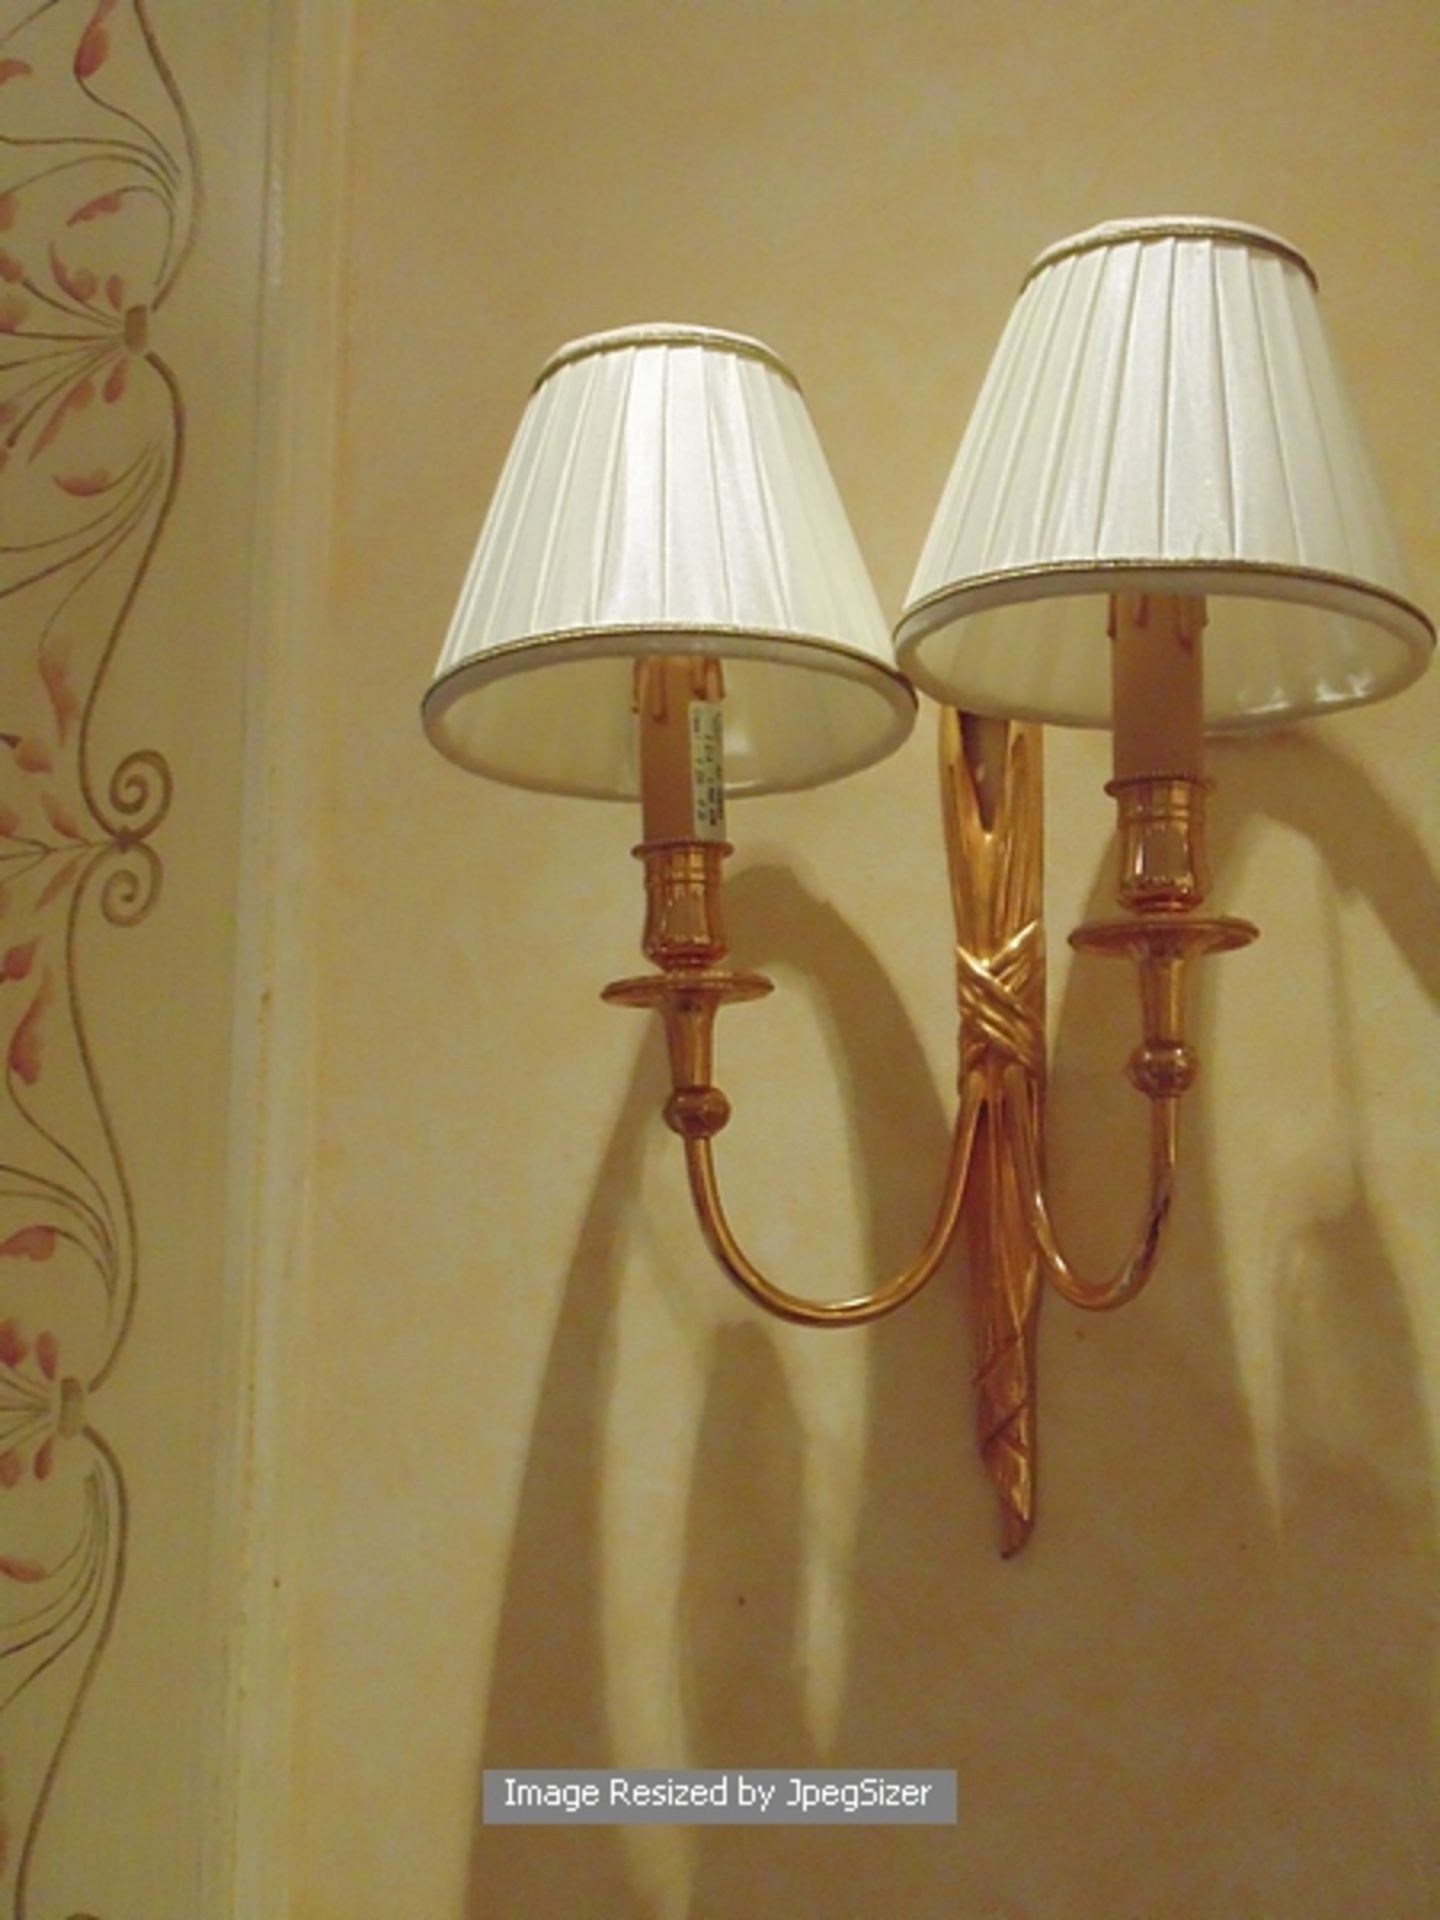 A pair of Laudarte wall sconces two candle wall light, bronze castings gold 24K finish 250mm x 270mm